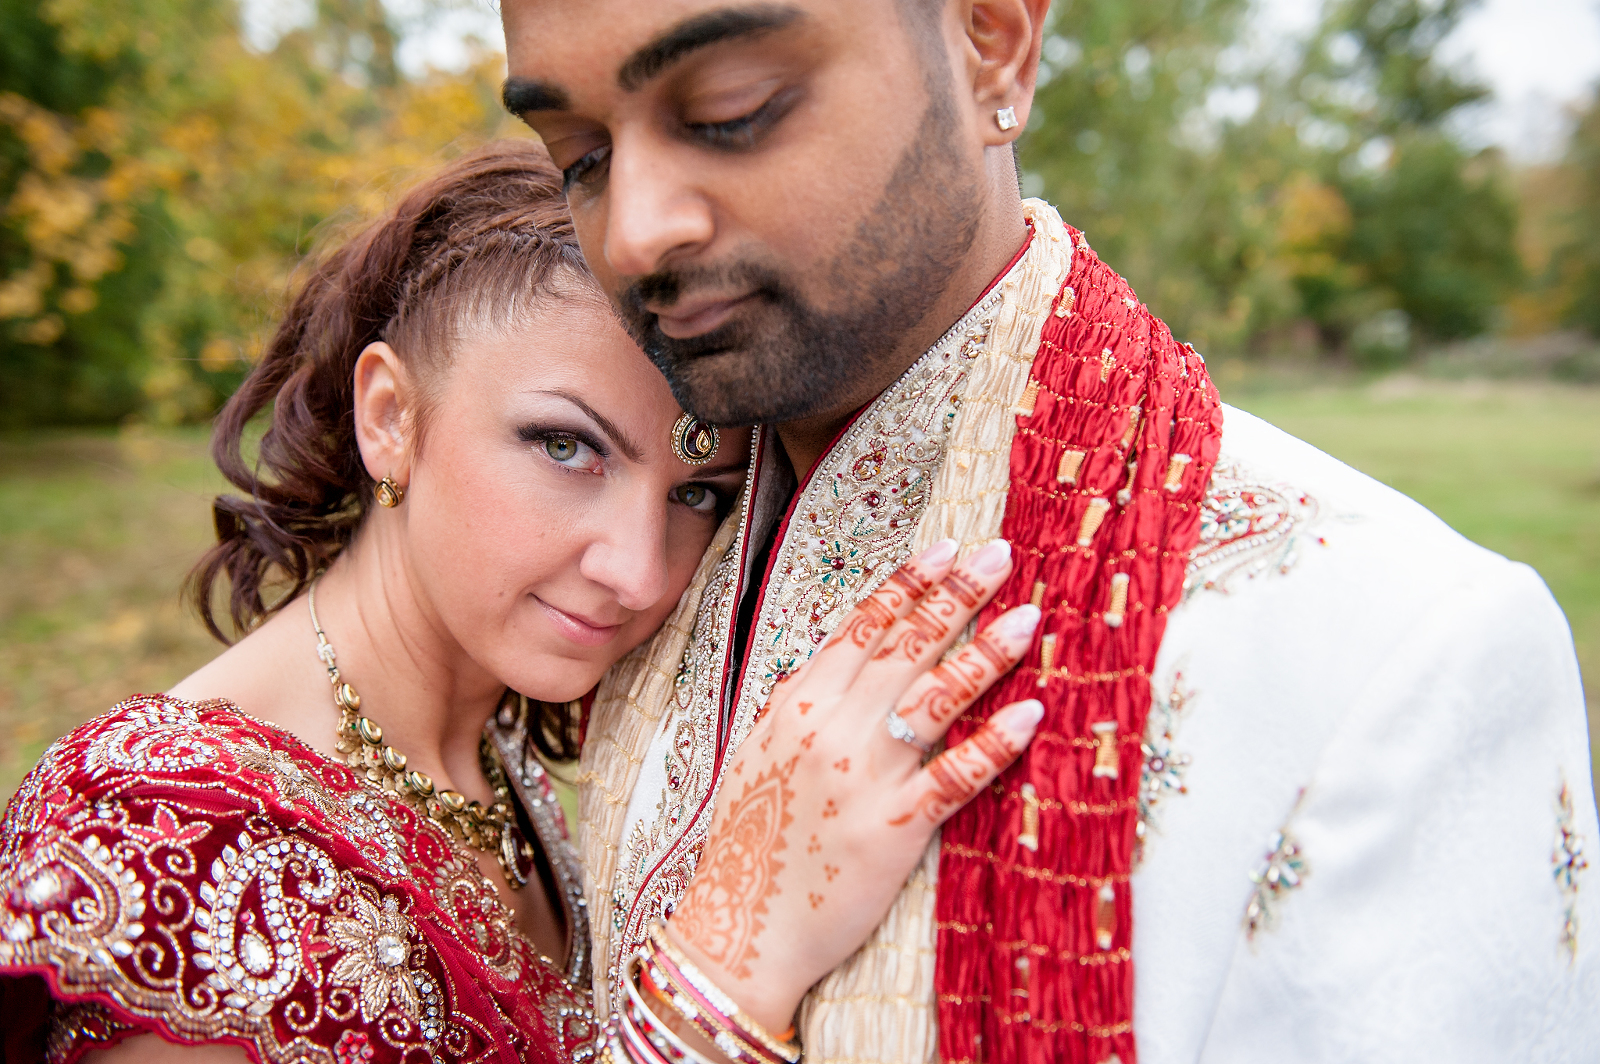 Indian wedding photographer in Epping Forest London